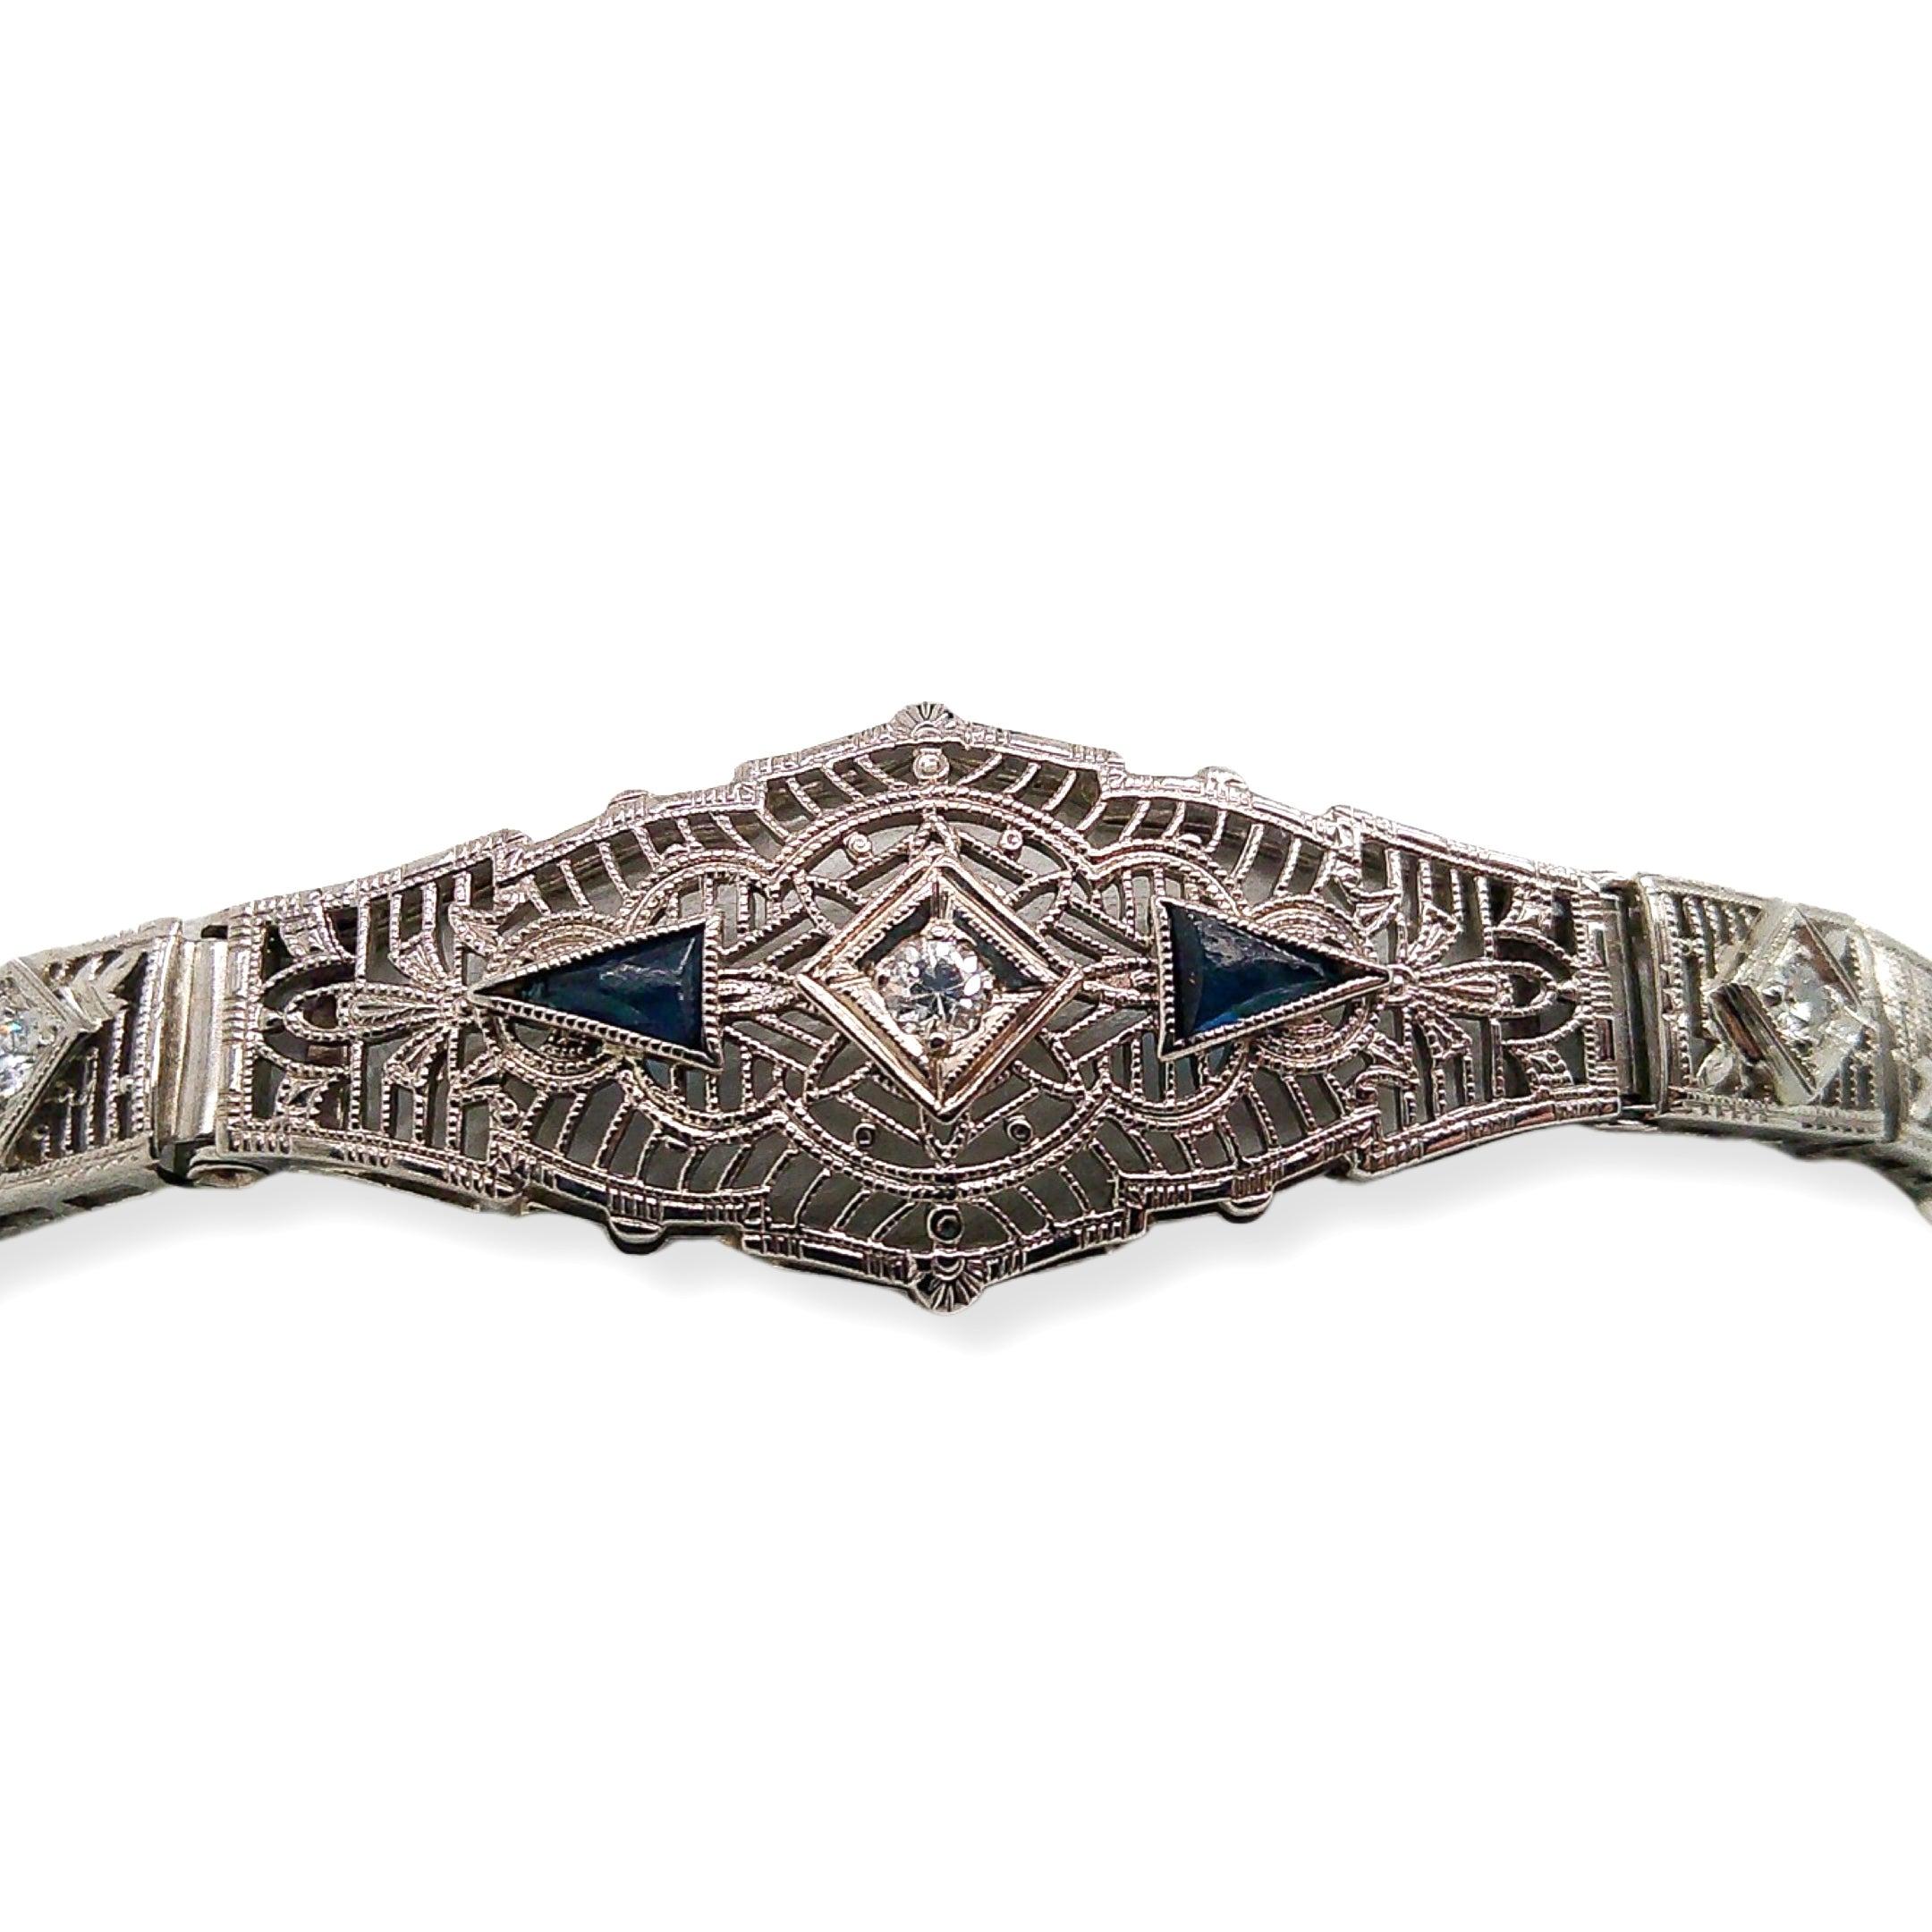 This antique piece was crafted sometime during the Art Deco design period (1920-1940). Antique filigree bracelets were very popular during this period and featured many filigree designs; from very floral to complex geometrical motifs. Each bracelet